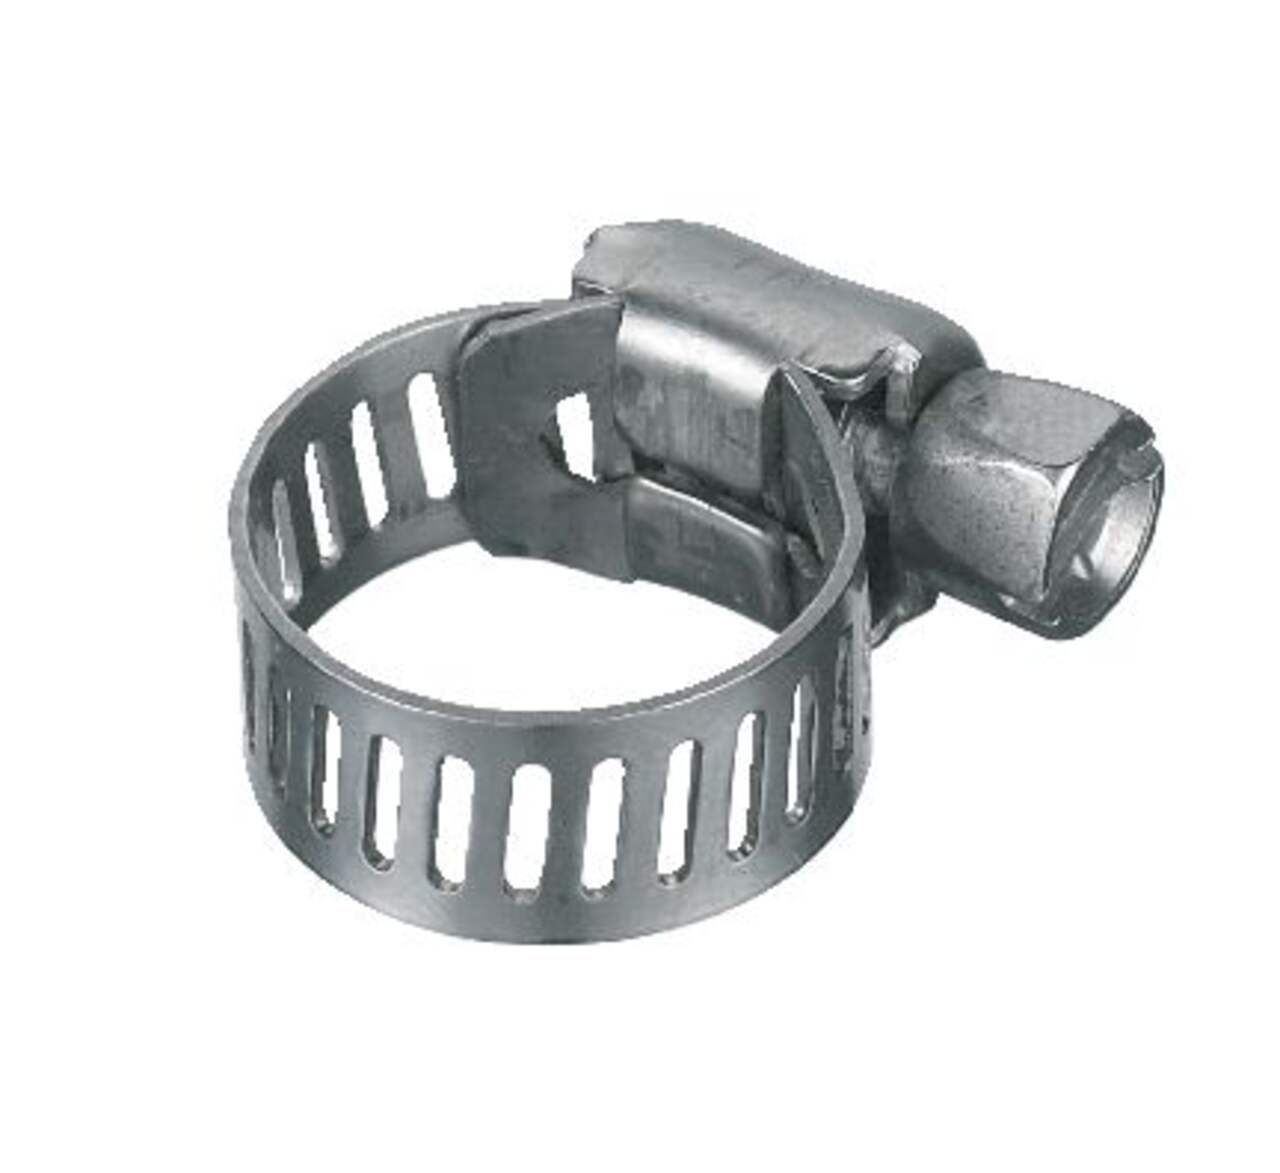 https://media-www.canadiantire.ca/product/fixing/plumbing/rough-plumbing/0632139/clamp-stainless-steel-7-32-5-8-bulk-5d206cf4-19a8-4330-86b5-ea23a0d22e7e-jpgrendition.jpg?imdensity=1&imwidth=640&impolicy=mZoom